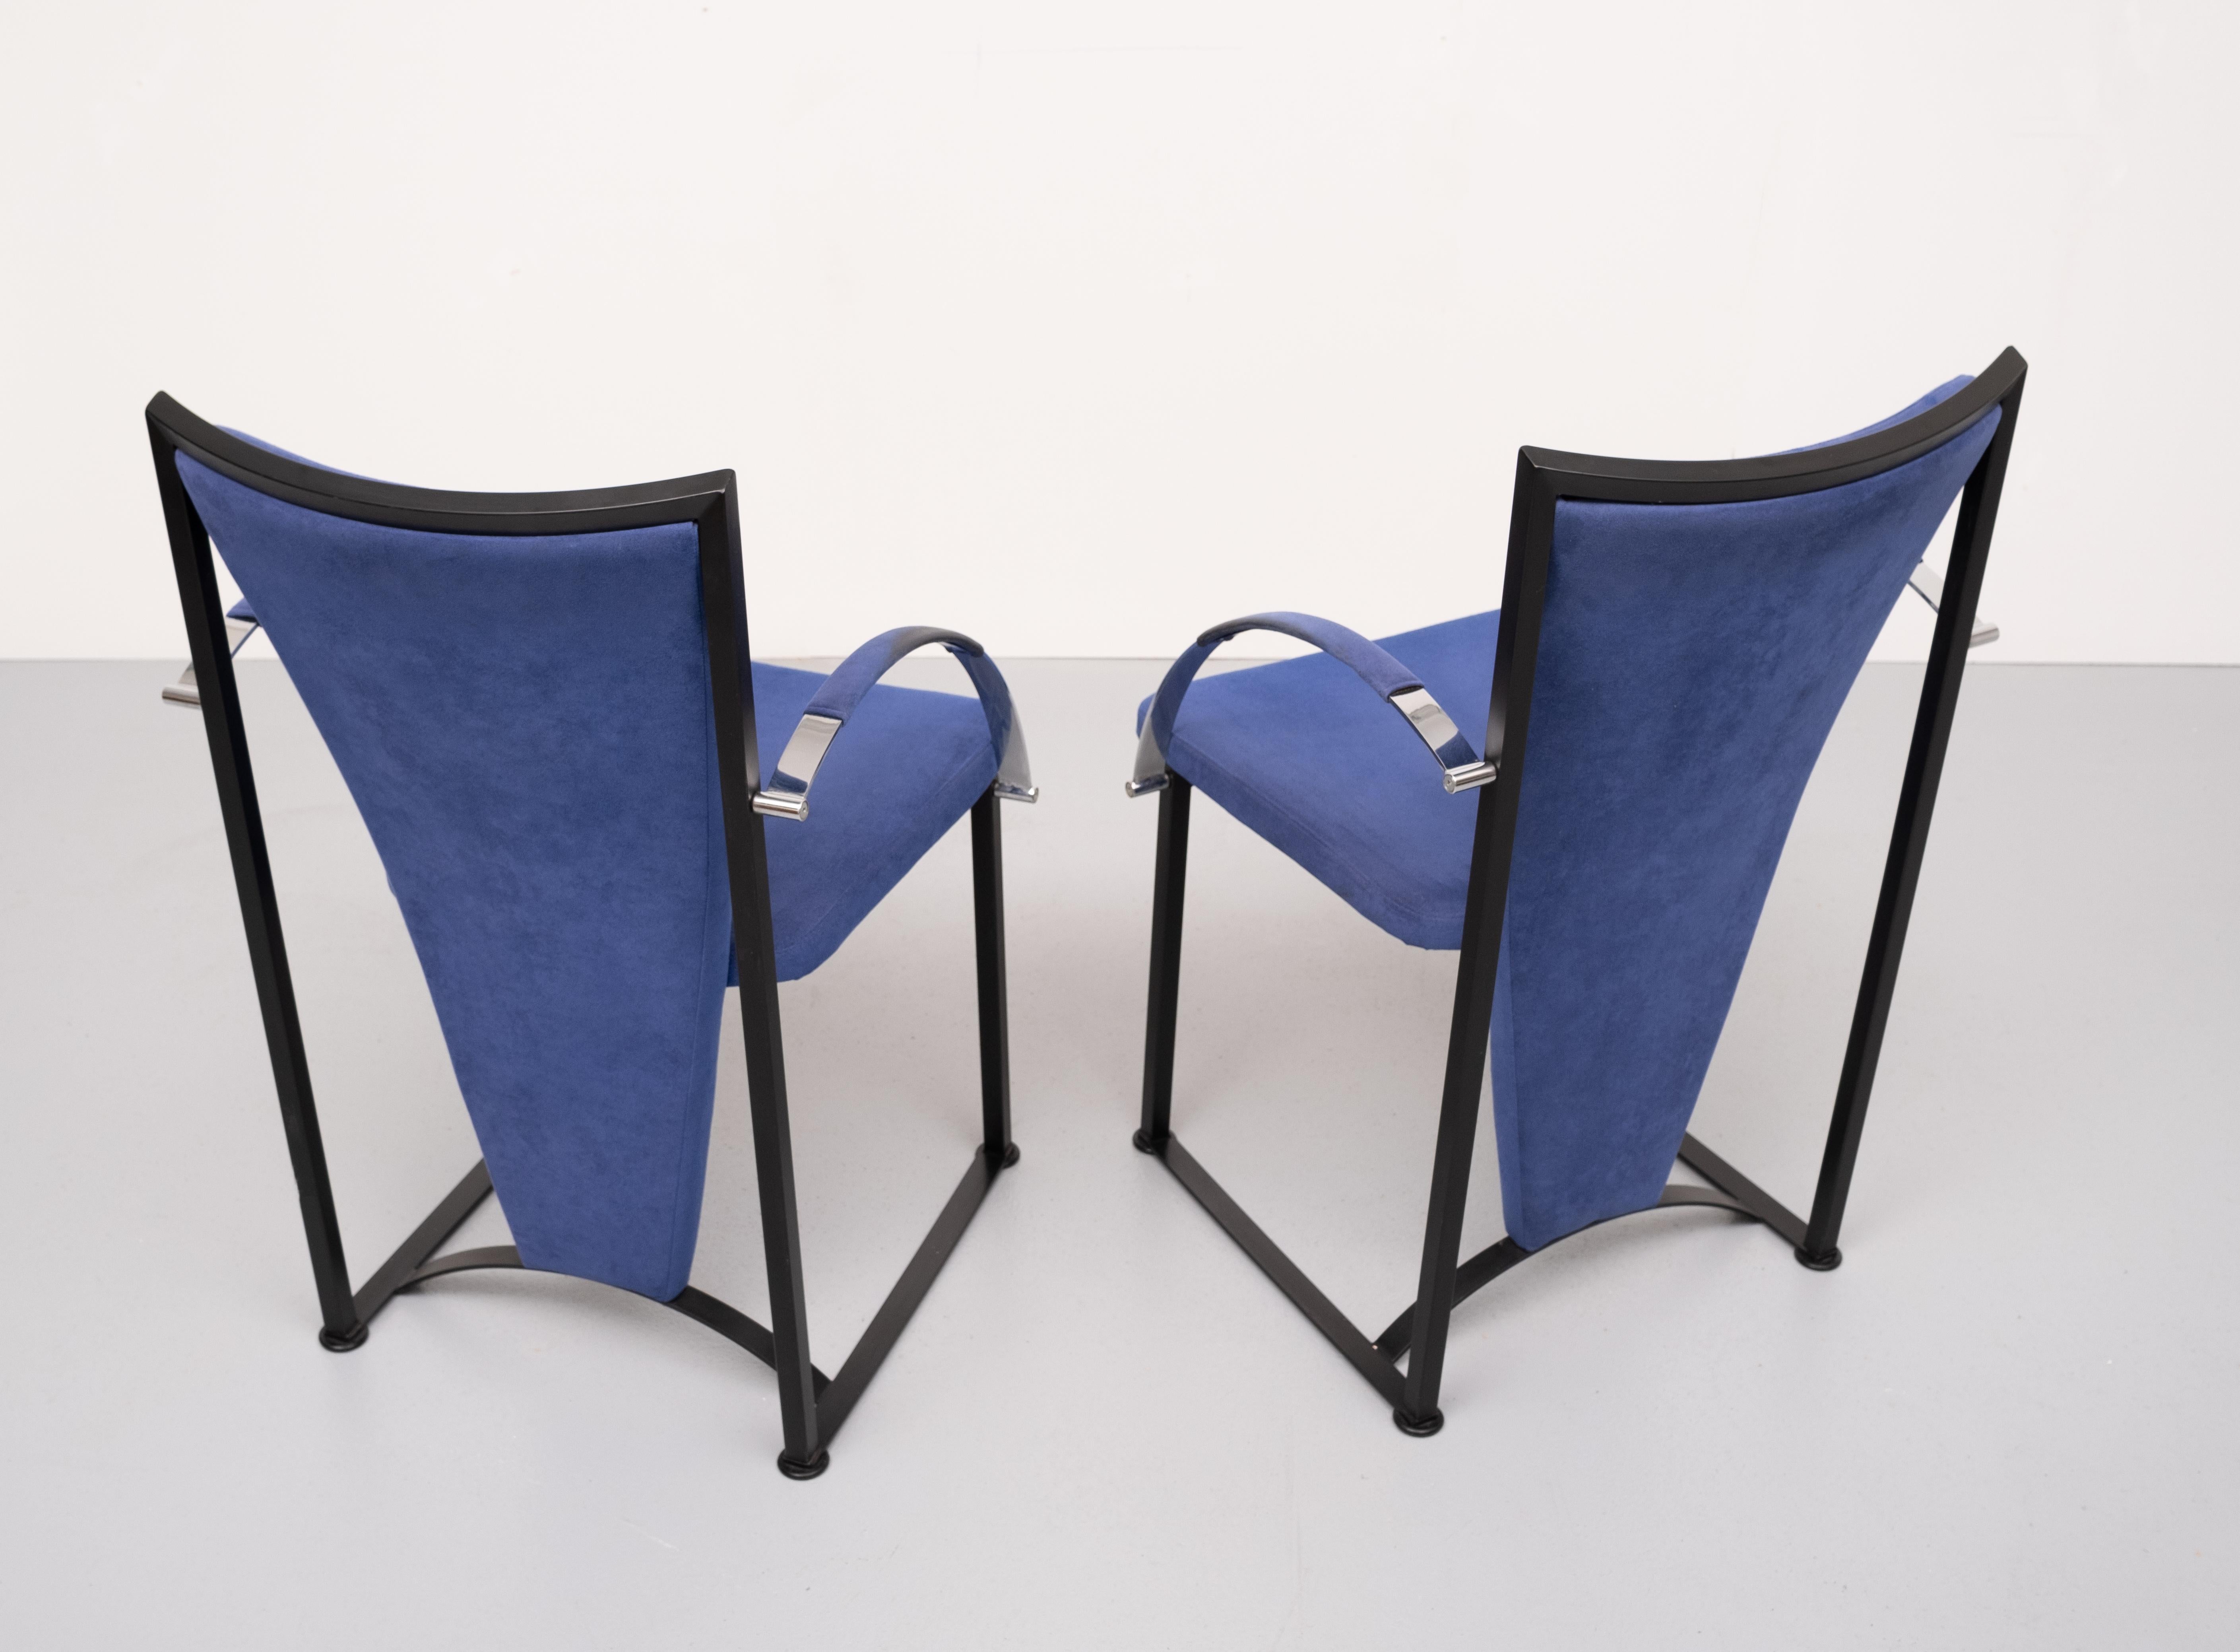 2 Memphis style armchairs. Black metal frame. Chrome steel armrest, Blue Alcatara
upholstery. 1980s good quality chairs. Some wear on the armrests. ''see photos ''
Overall in good condition.